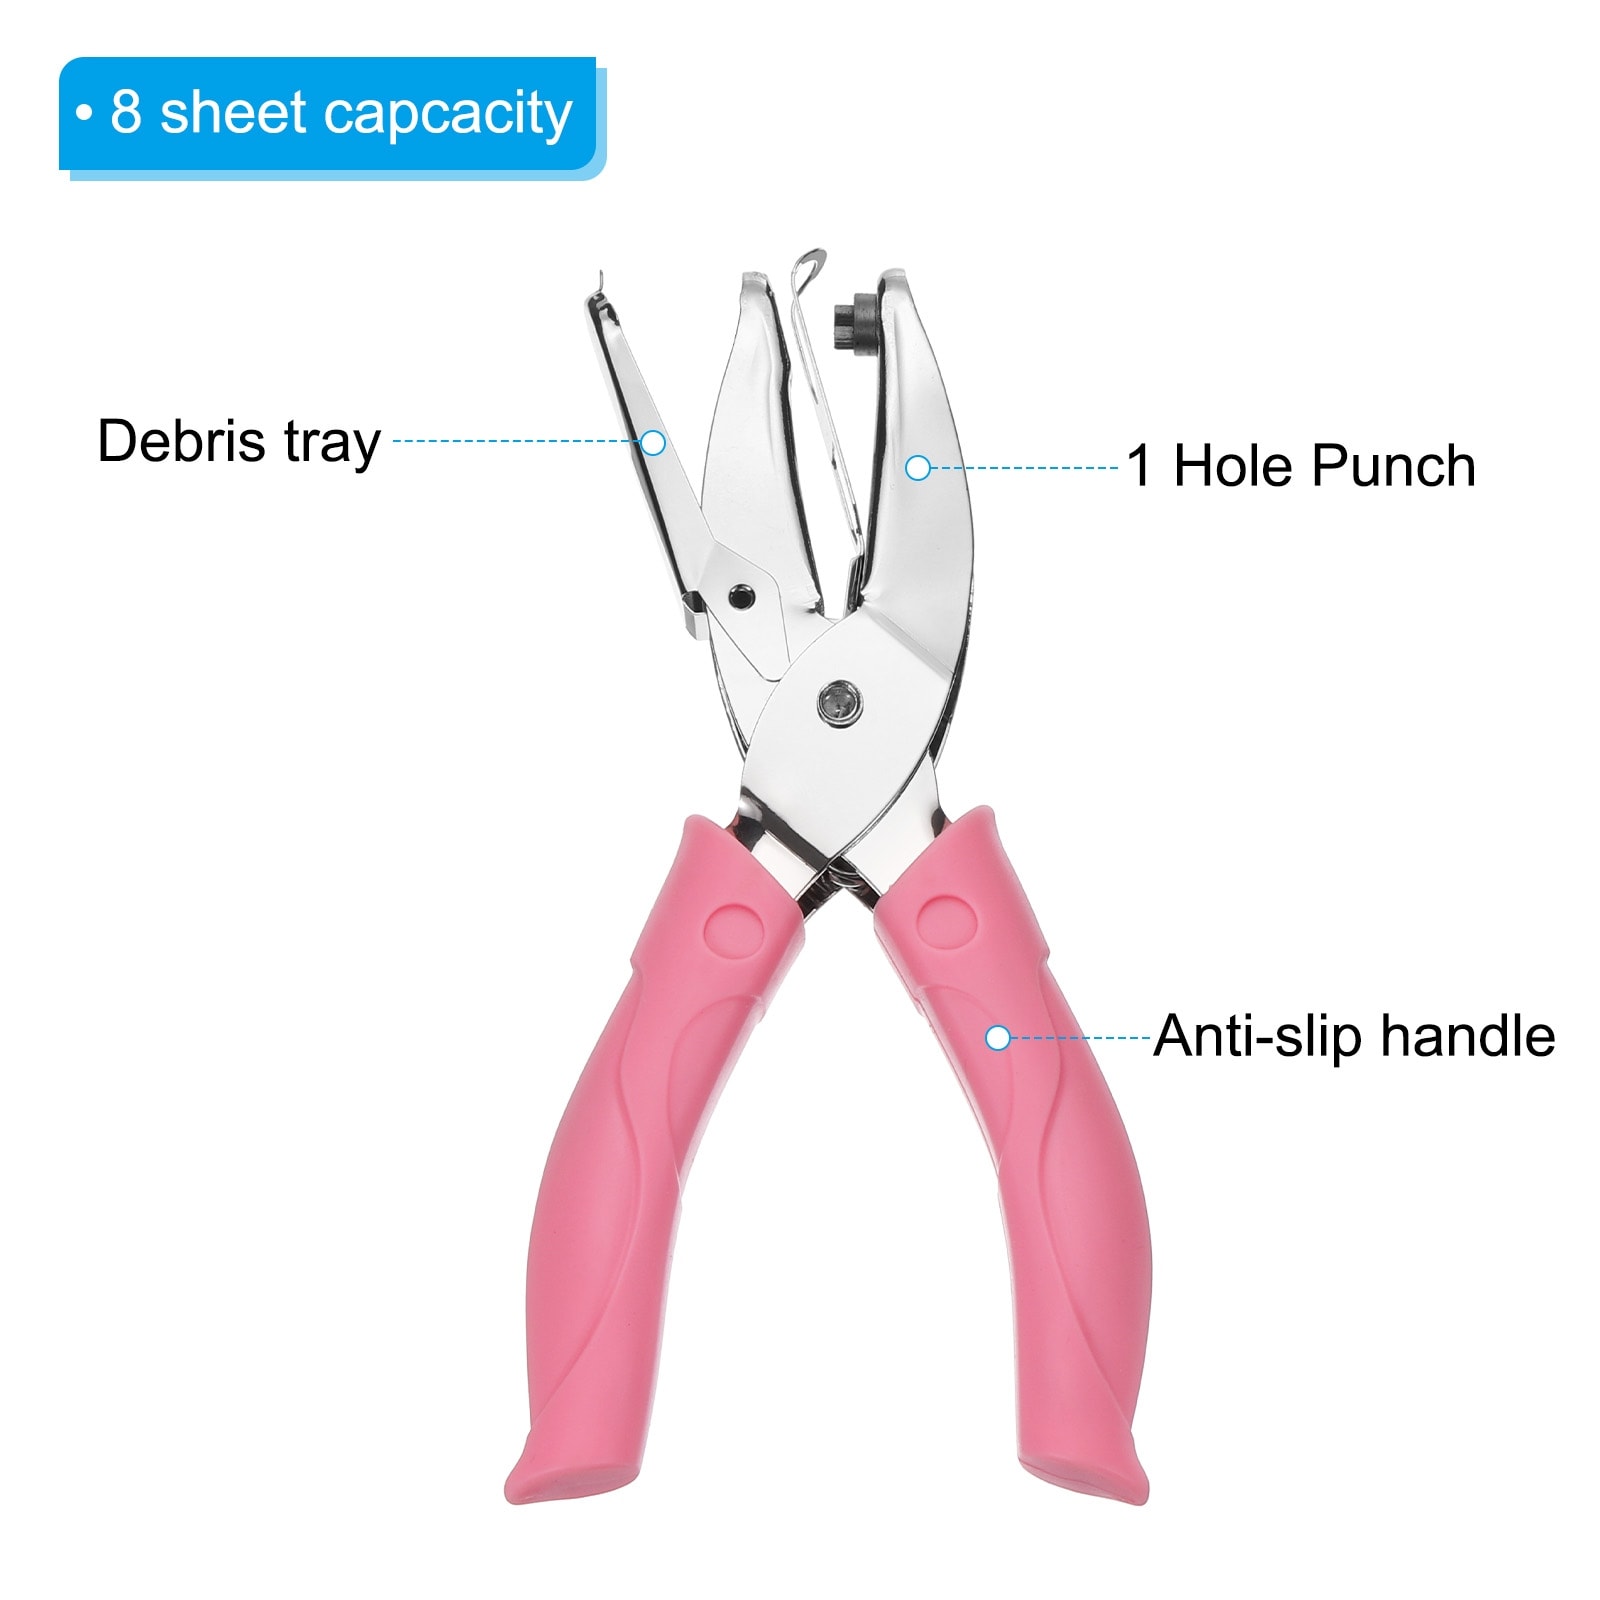 0.2 Single Hole Punch Handheld Hole Puncher Star Hole Paper Puncher, Pink  - Bed Bath & Beyond - 37683420